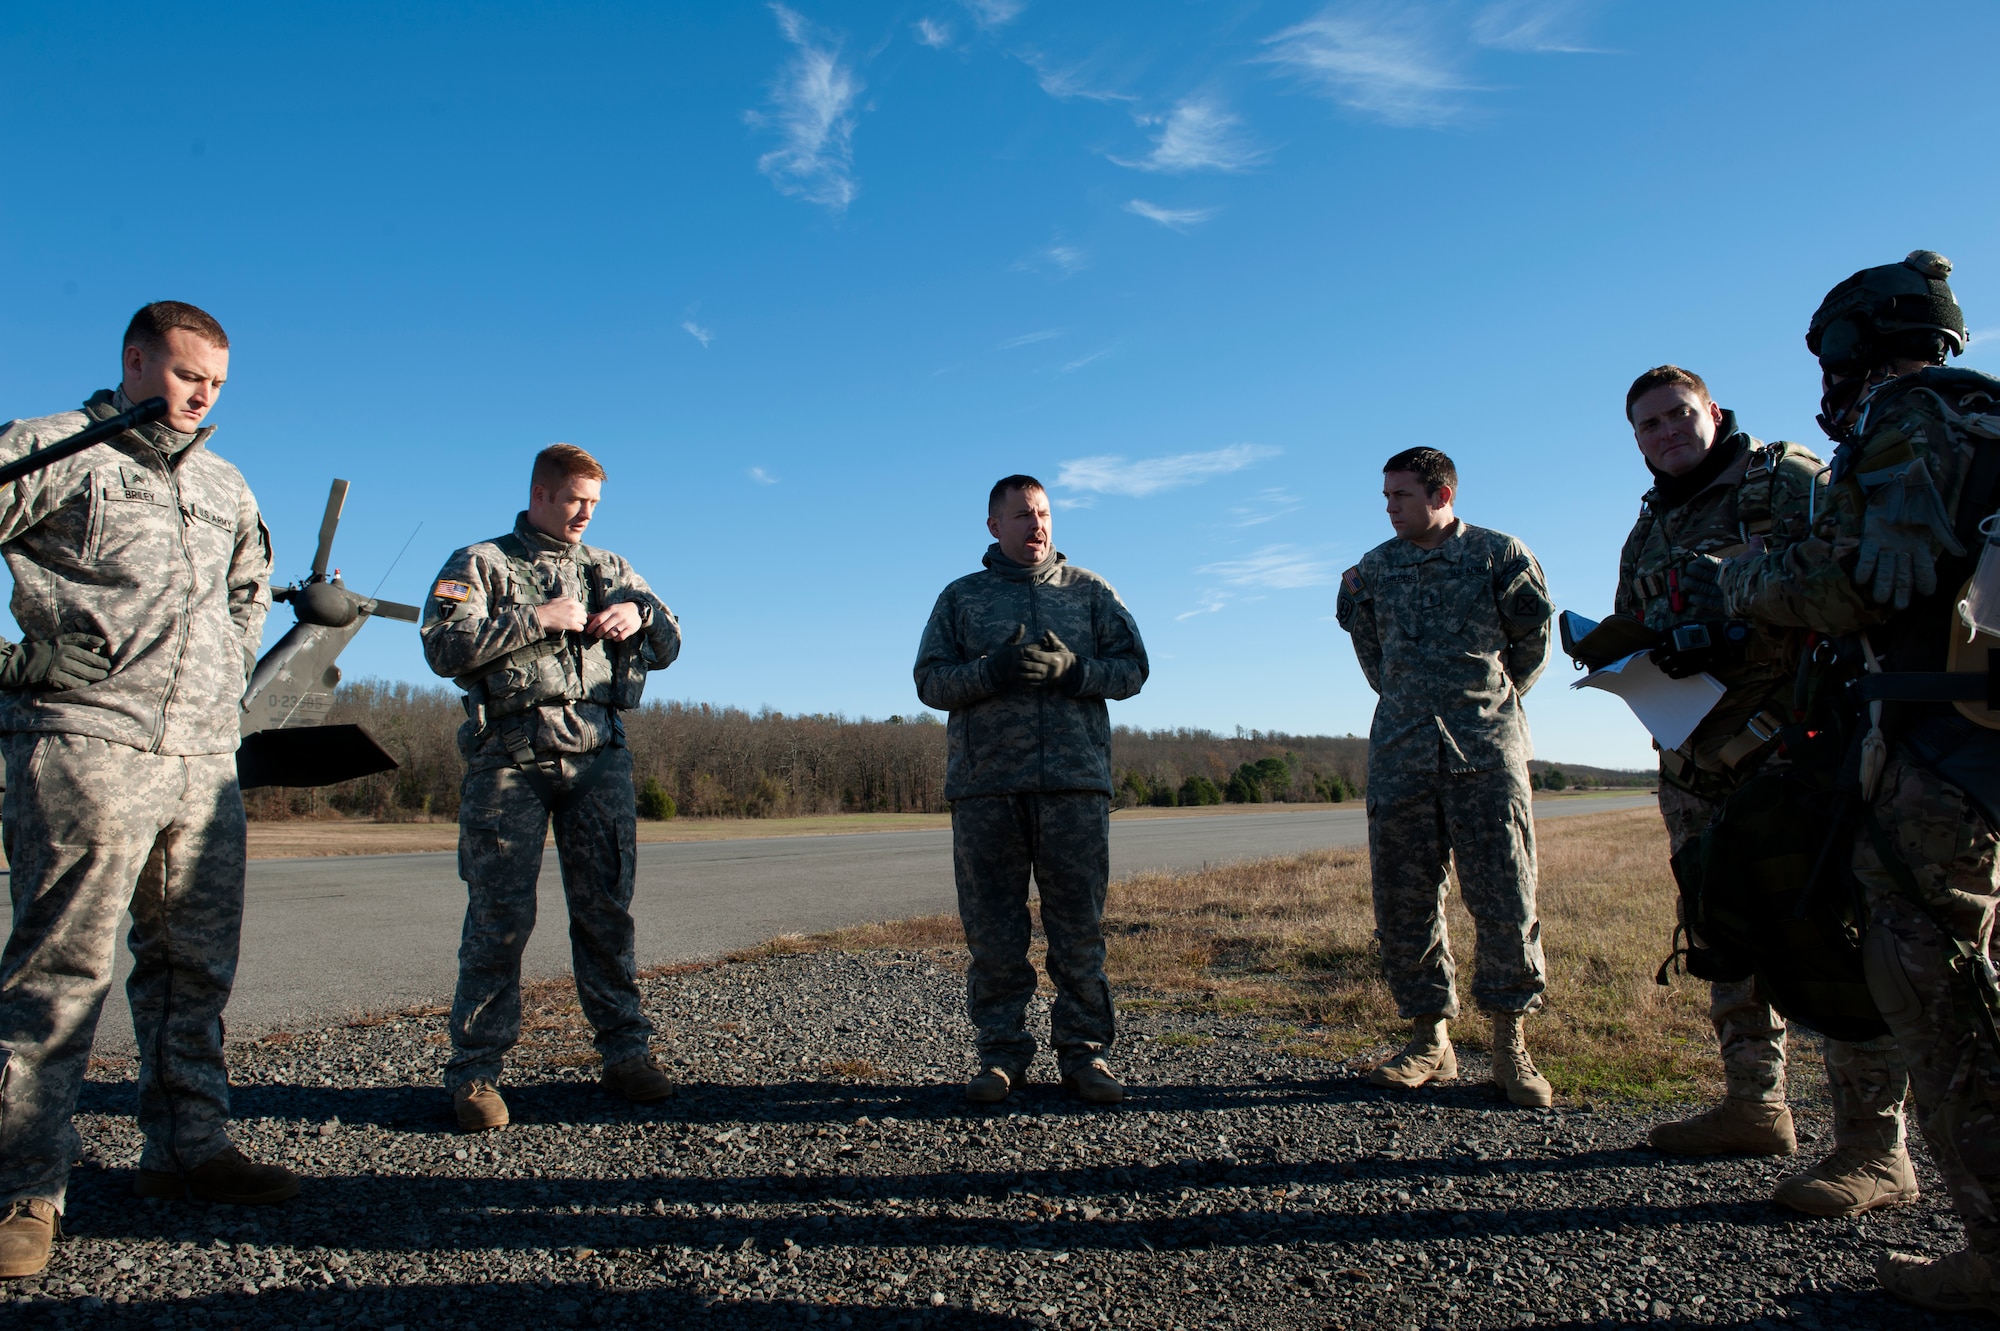 U.S. Army Staff Sgt. Jonathan Watson, 77th Theater Aviation Brigade standardization inspector and UH-60 Blackhawk pilot, briefs survival, evasion, resistance and escape specialists from the 19th, 375th and Air Mobility Command Headquarters before a flight Nov. 12, 2015, at Camp Robinson, Ark. The SERE specialists teamed up with the U.S. Army personnel assigned to the 77th Theater Aviation Brigade as well as combat control students assigned to the Special Tactics Training Squadron at Hurlburt Field, Fla., as part of required training. (U.S. Air Force photo by Airman 1st Class Mercedes Muro) 